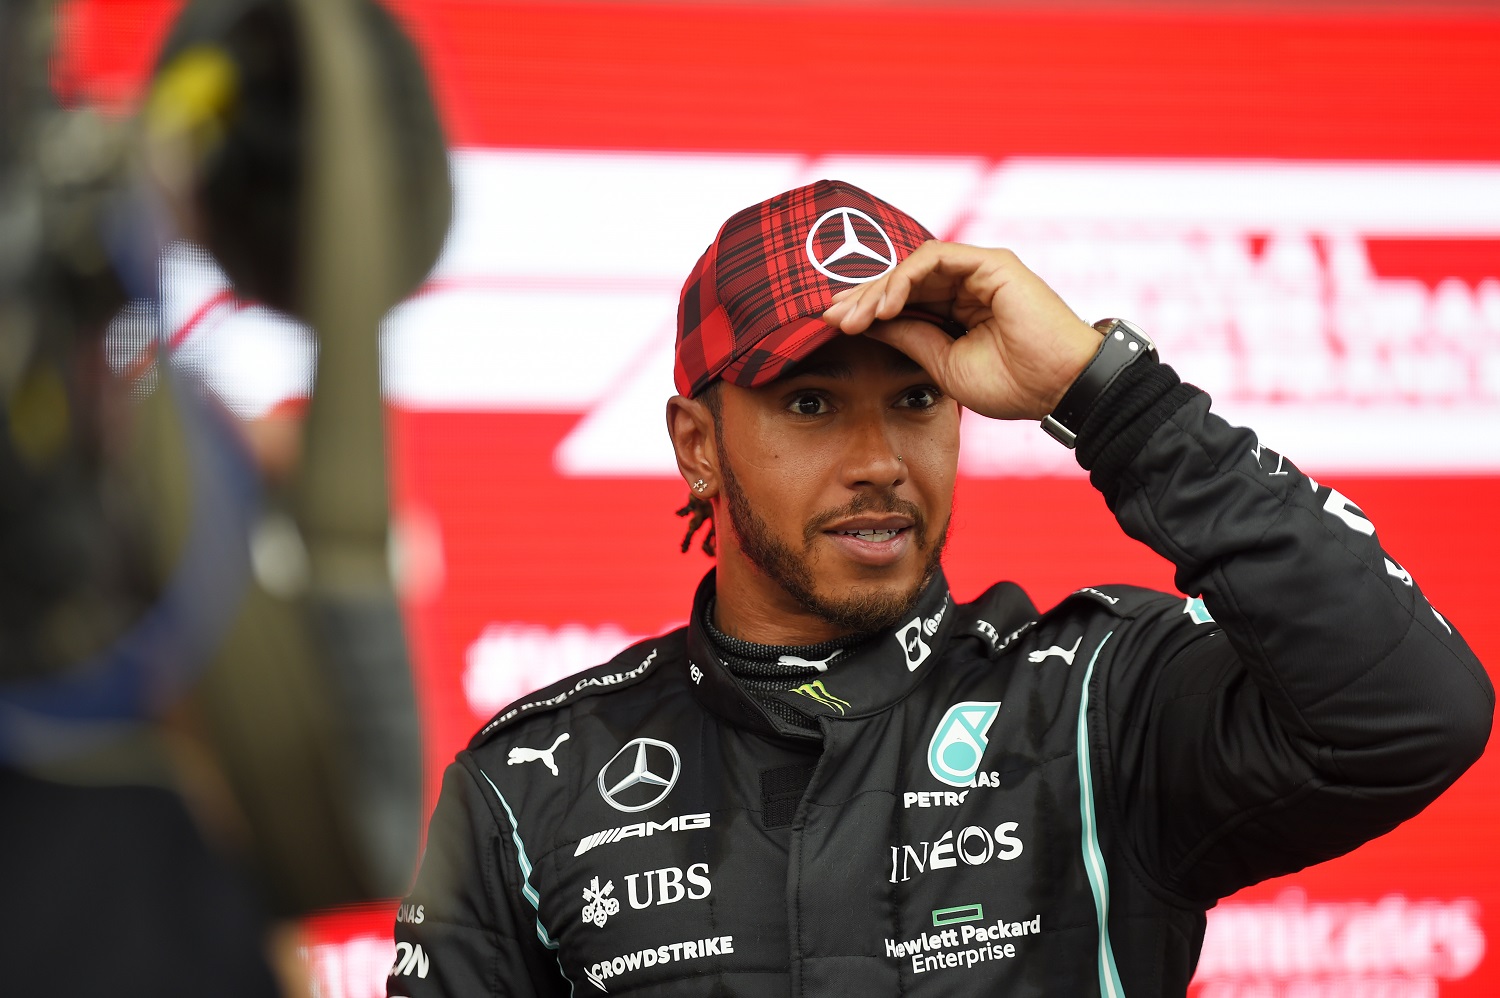 Lewis Hamilton is interviewed after qualifying ahead of the F1 Grand Prix of France on June 19, 2021.